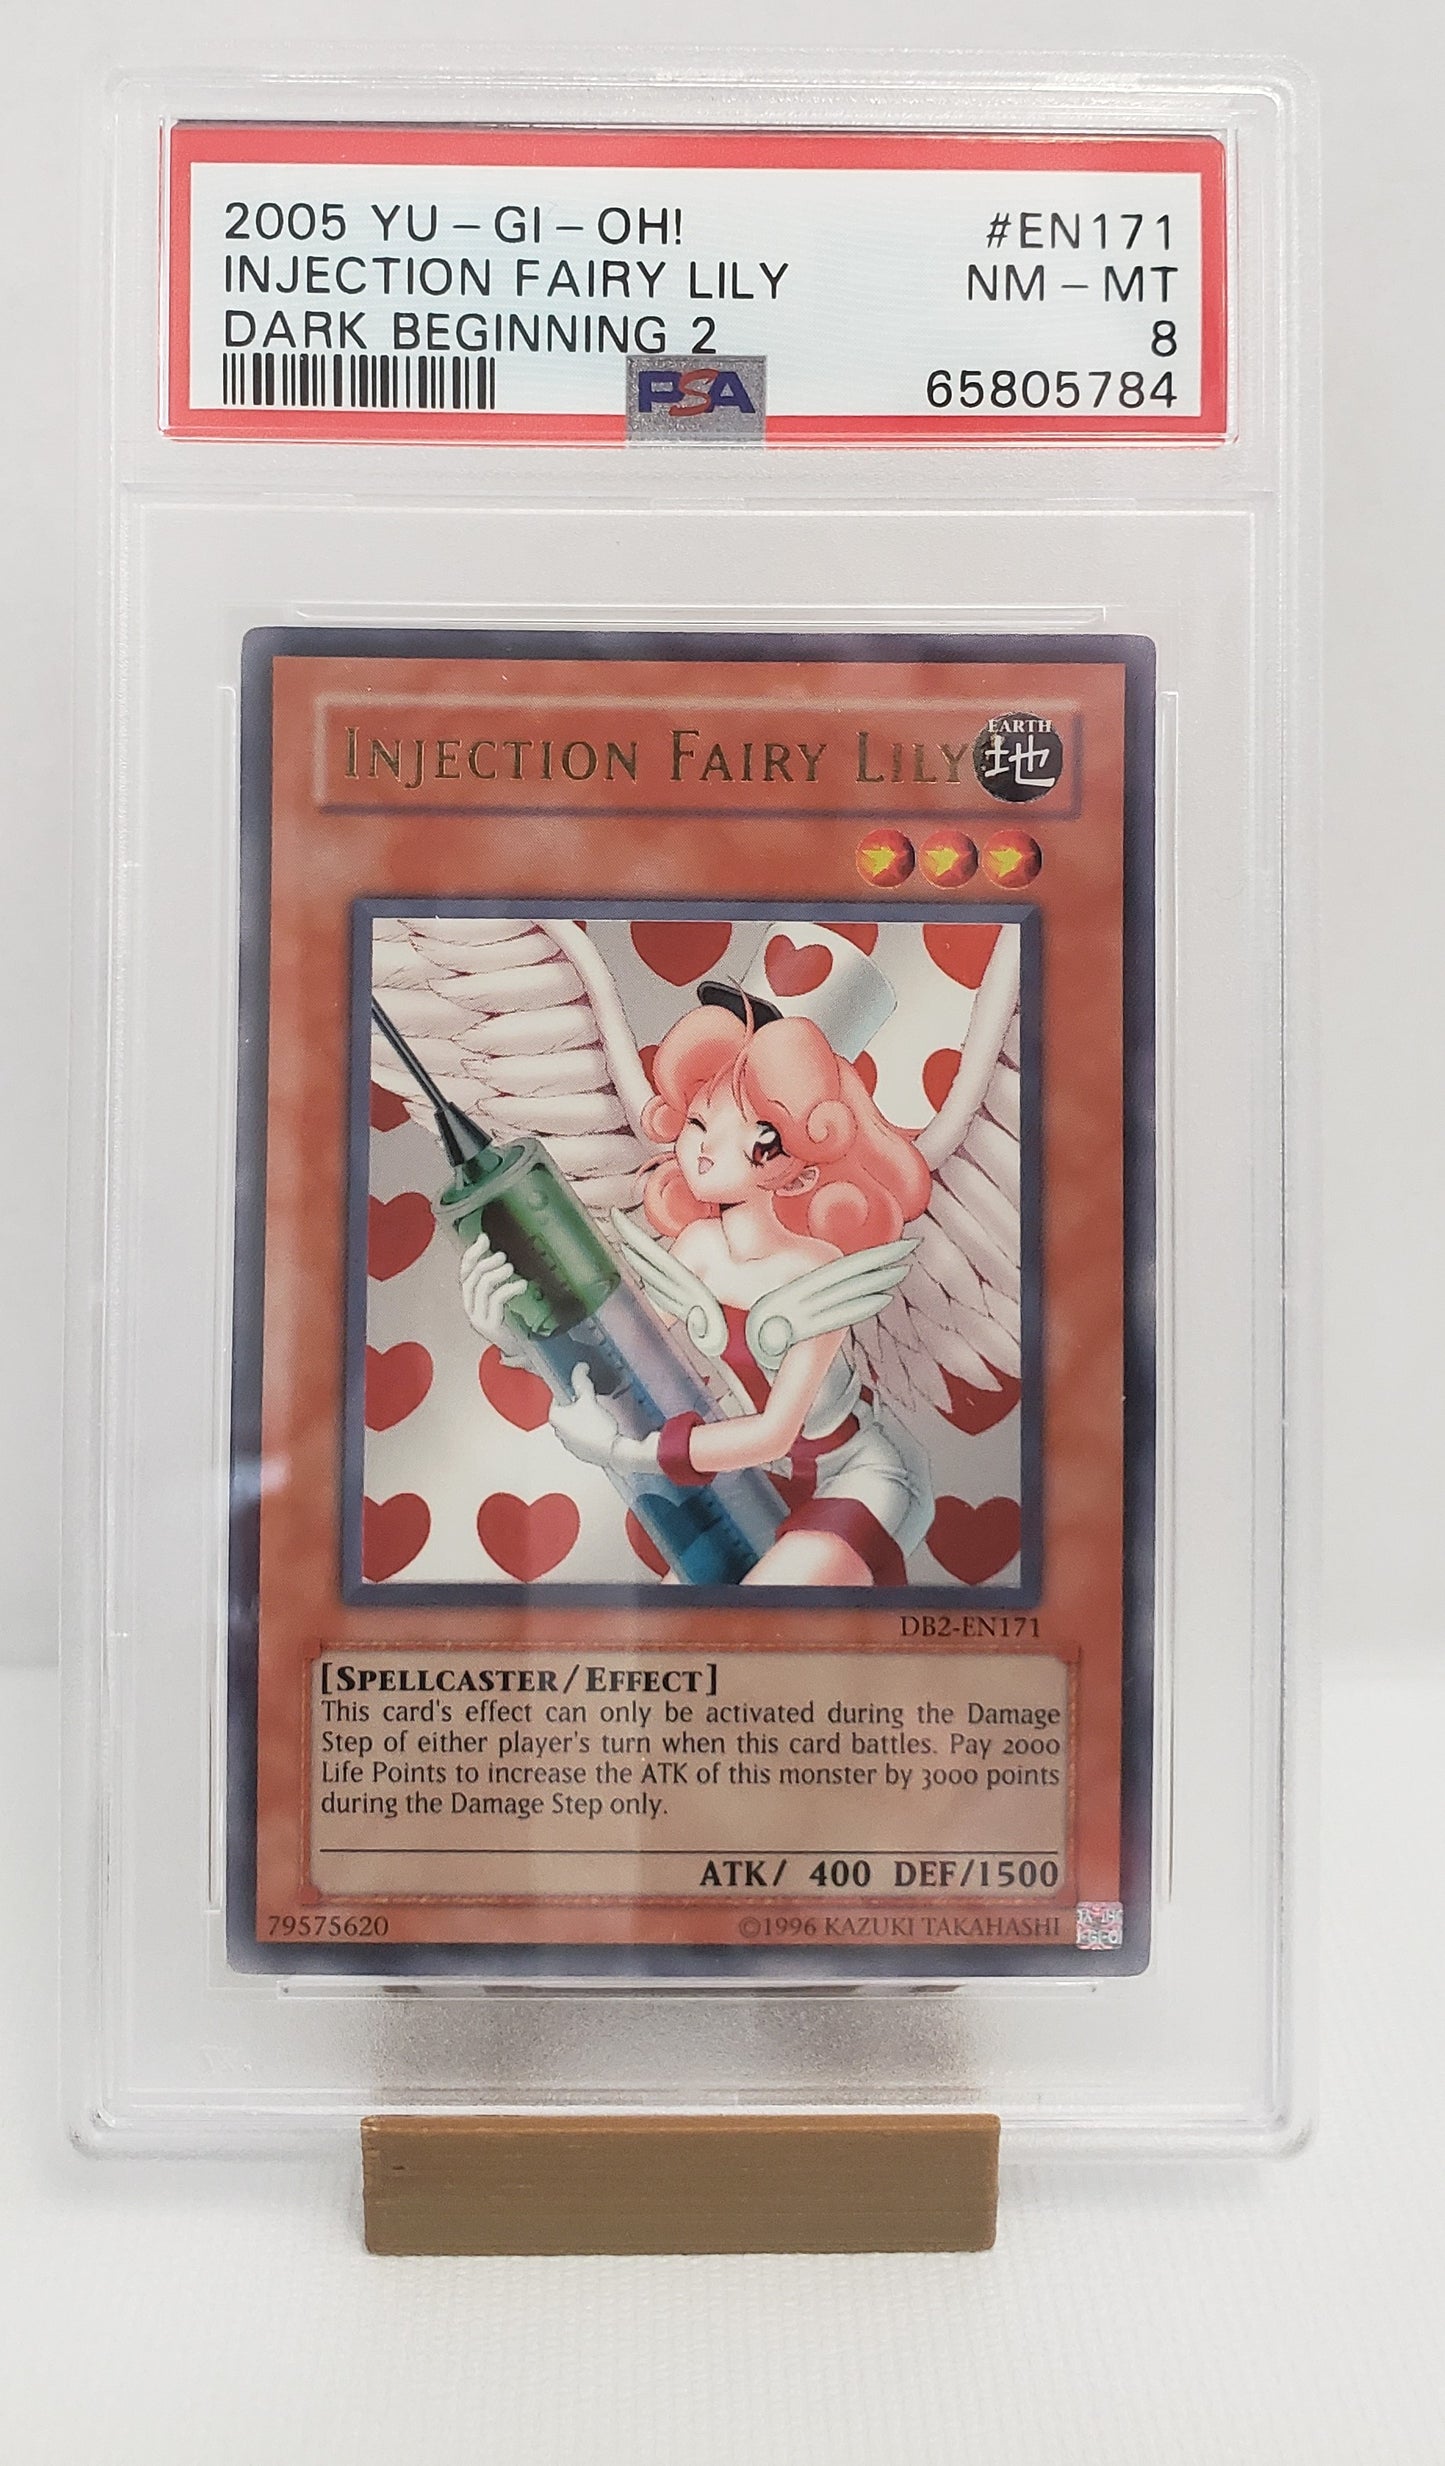 Injection Fairy Lily (DB2-EN171) PSA 8